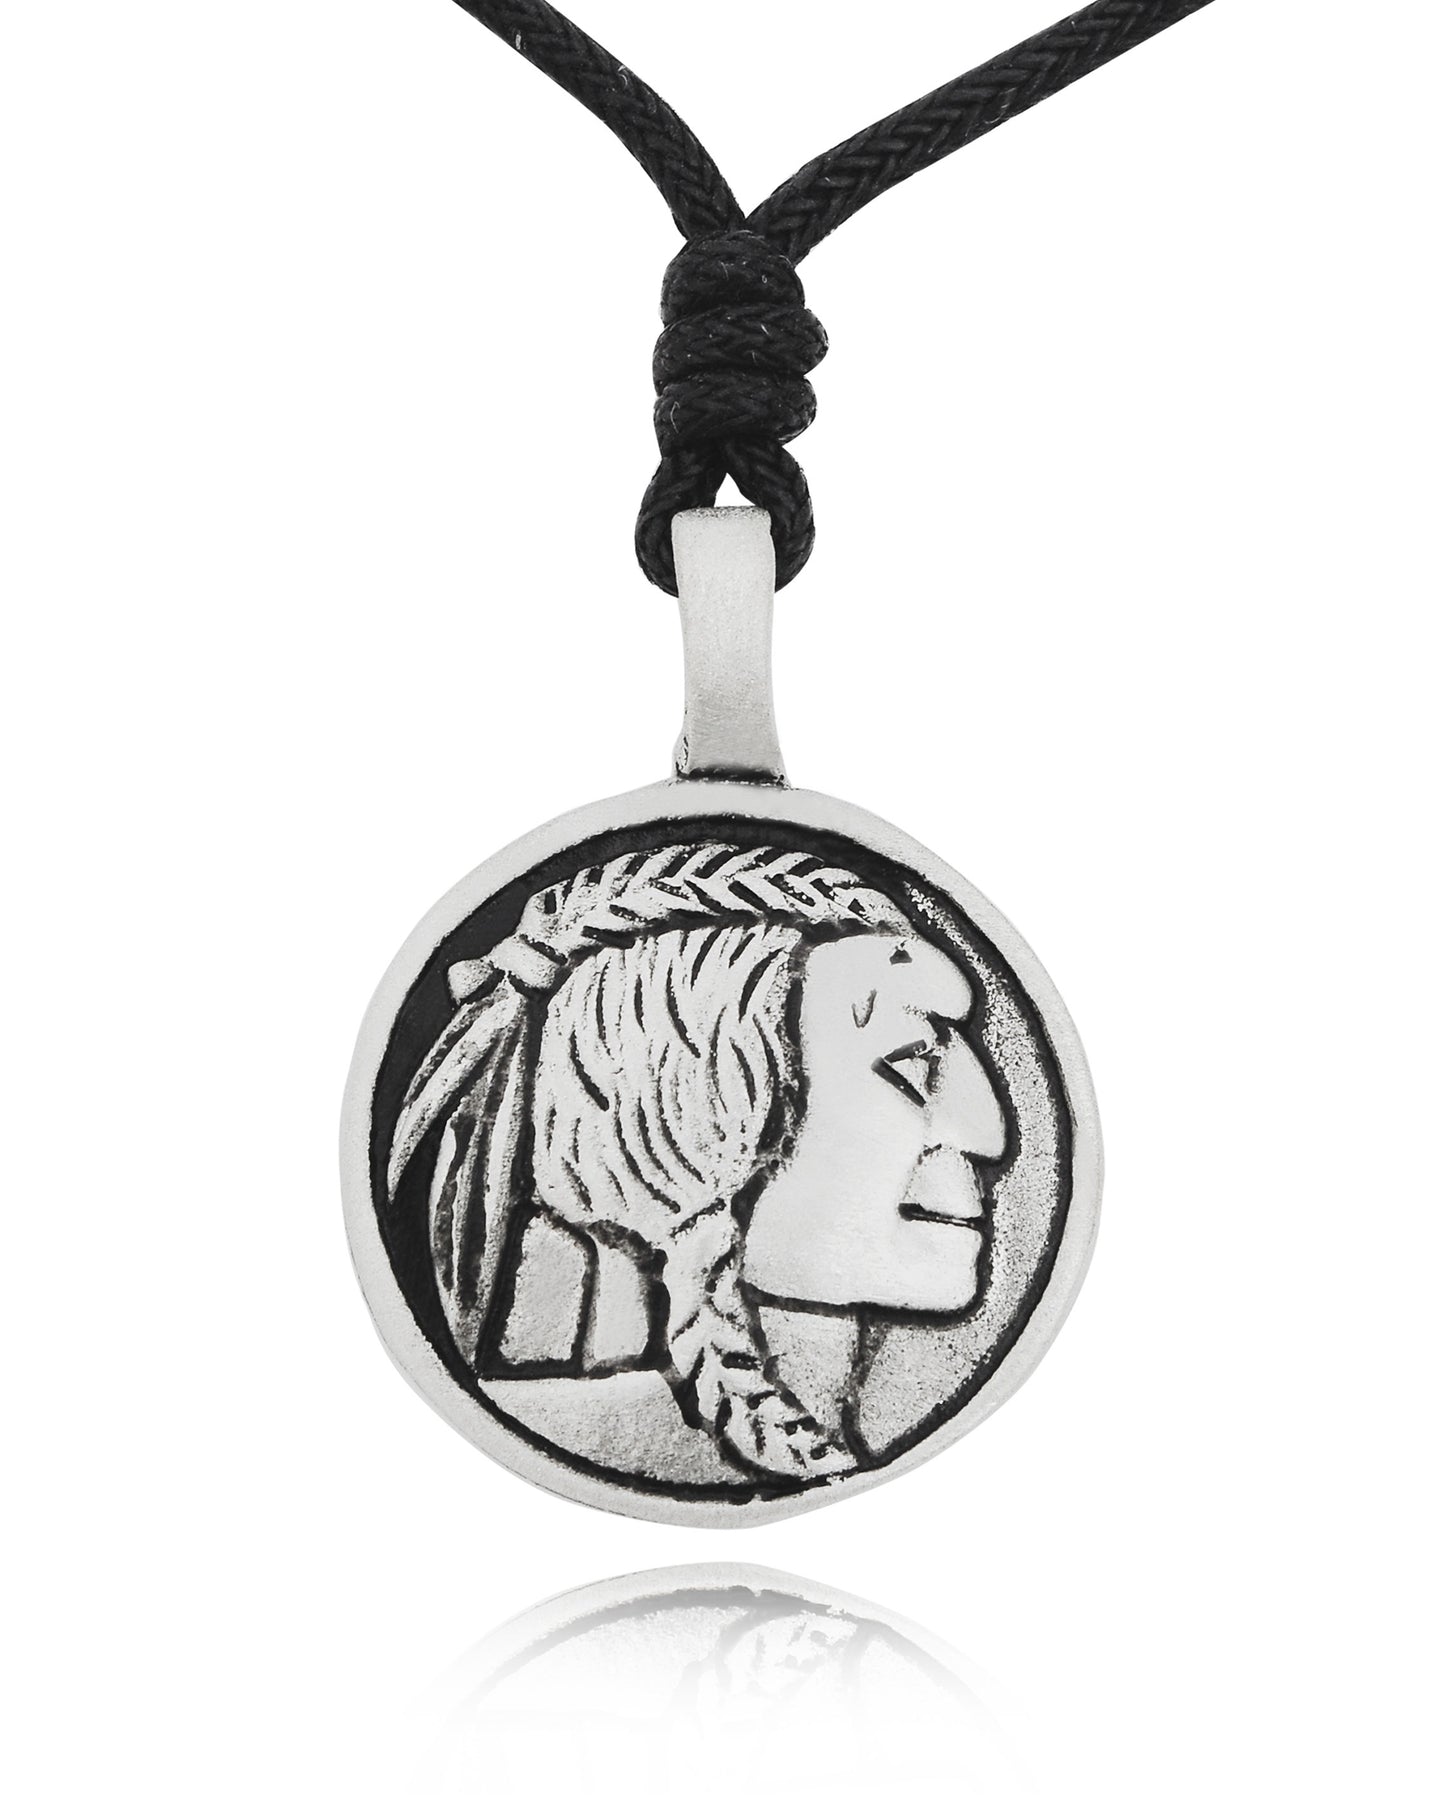 Indian Head Nickel Silver Pewter Charm Necklace Pendant Jewelry